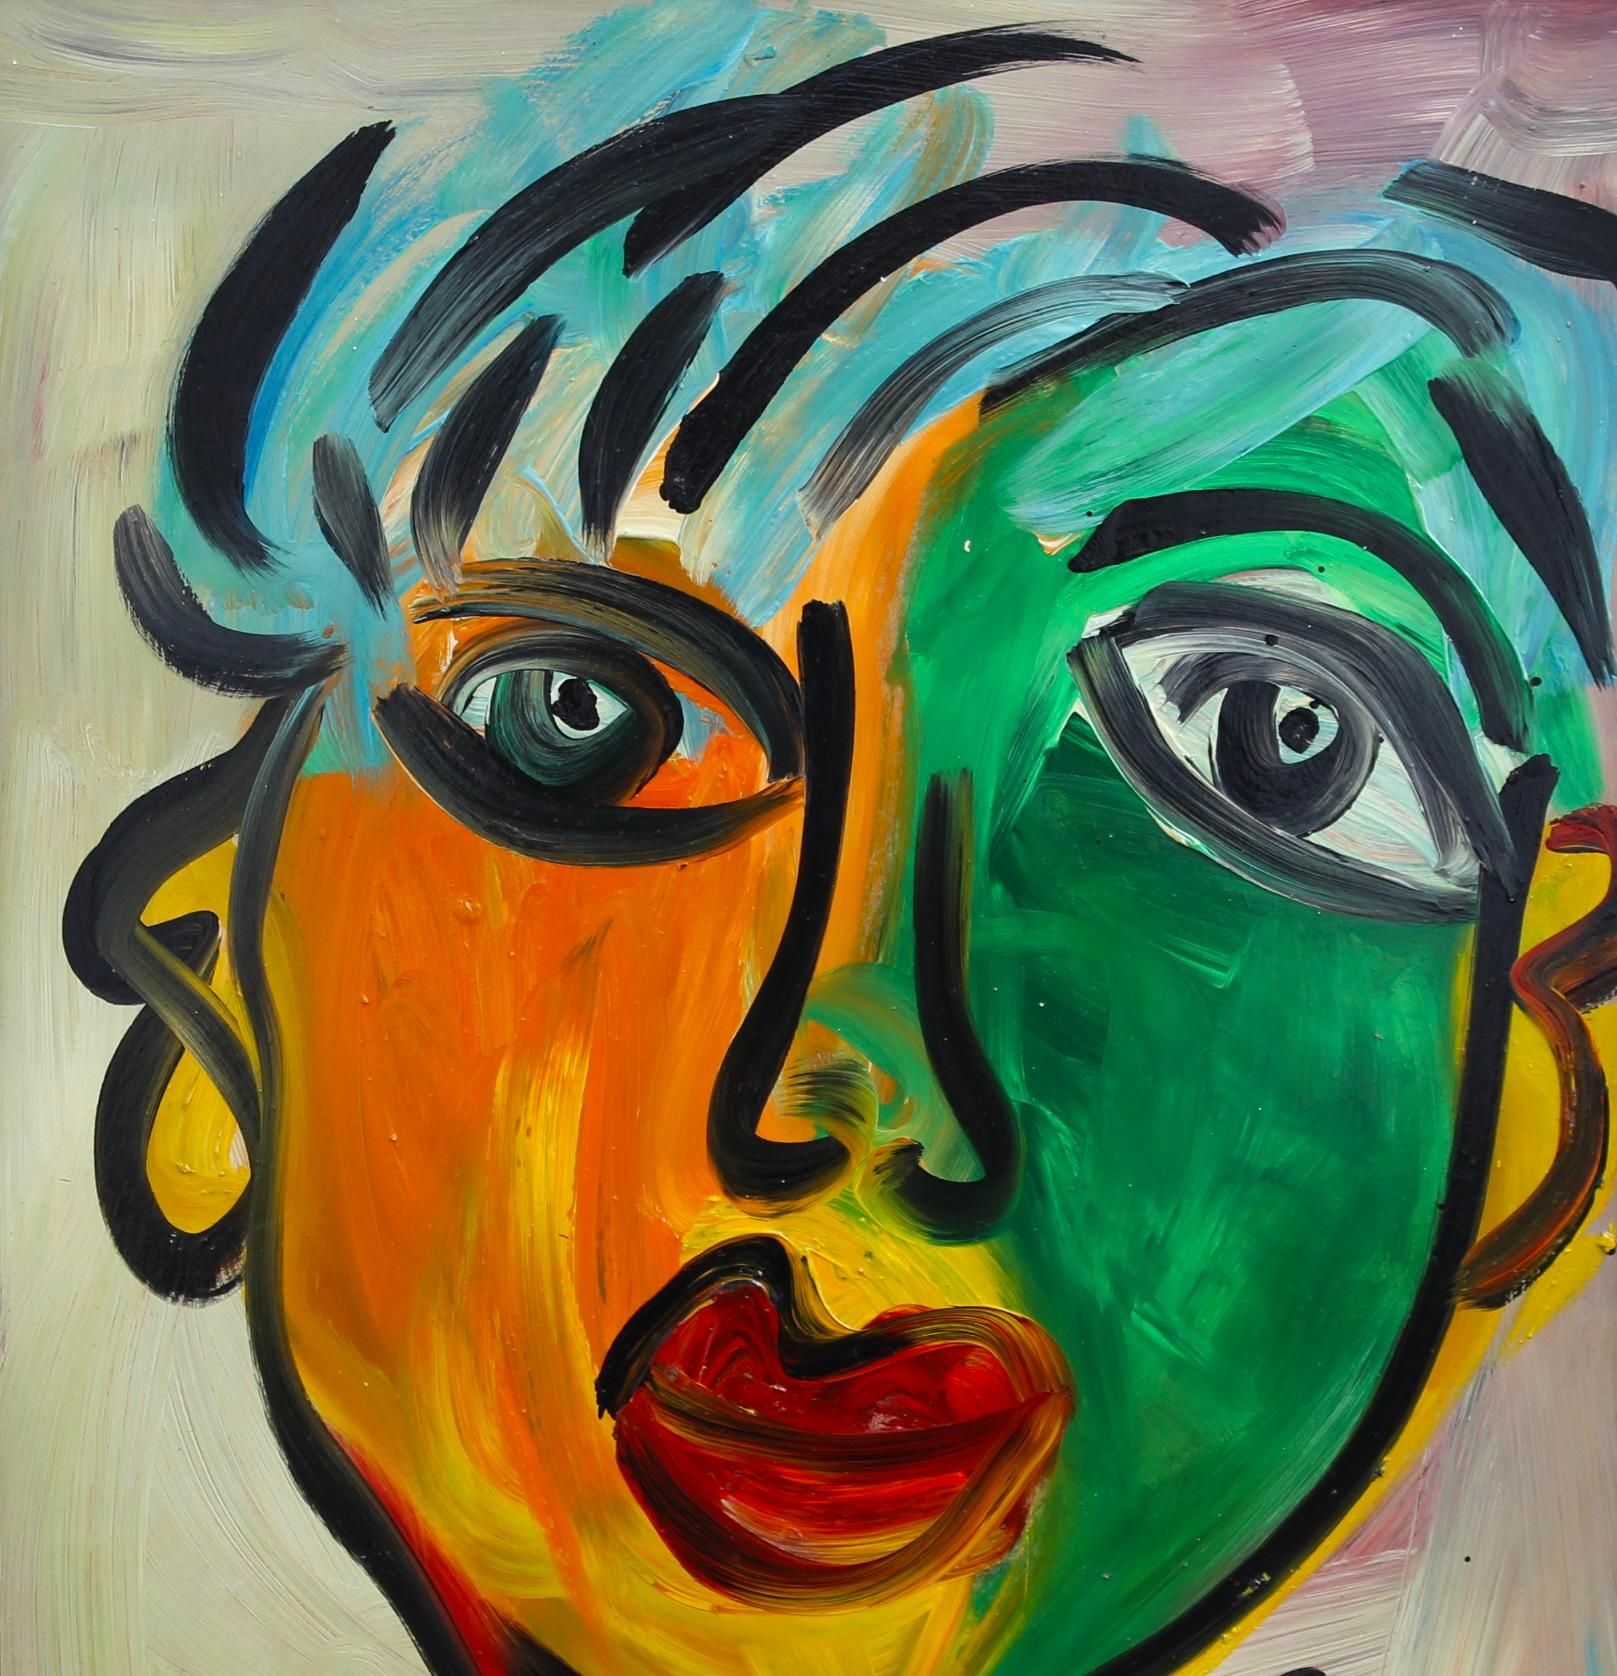 'Portrait of a Woman with Short Hair', oil on board, by Peter Robert Keil (1983). A wide-eyed woman gazes out to the viewer with a tranquil smile. The colours appear in quadrants in the composition, perhaps reflective of the subject's many moods.